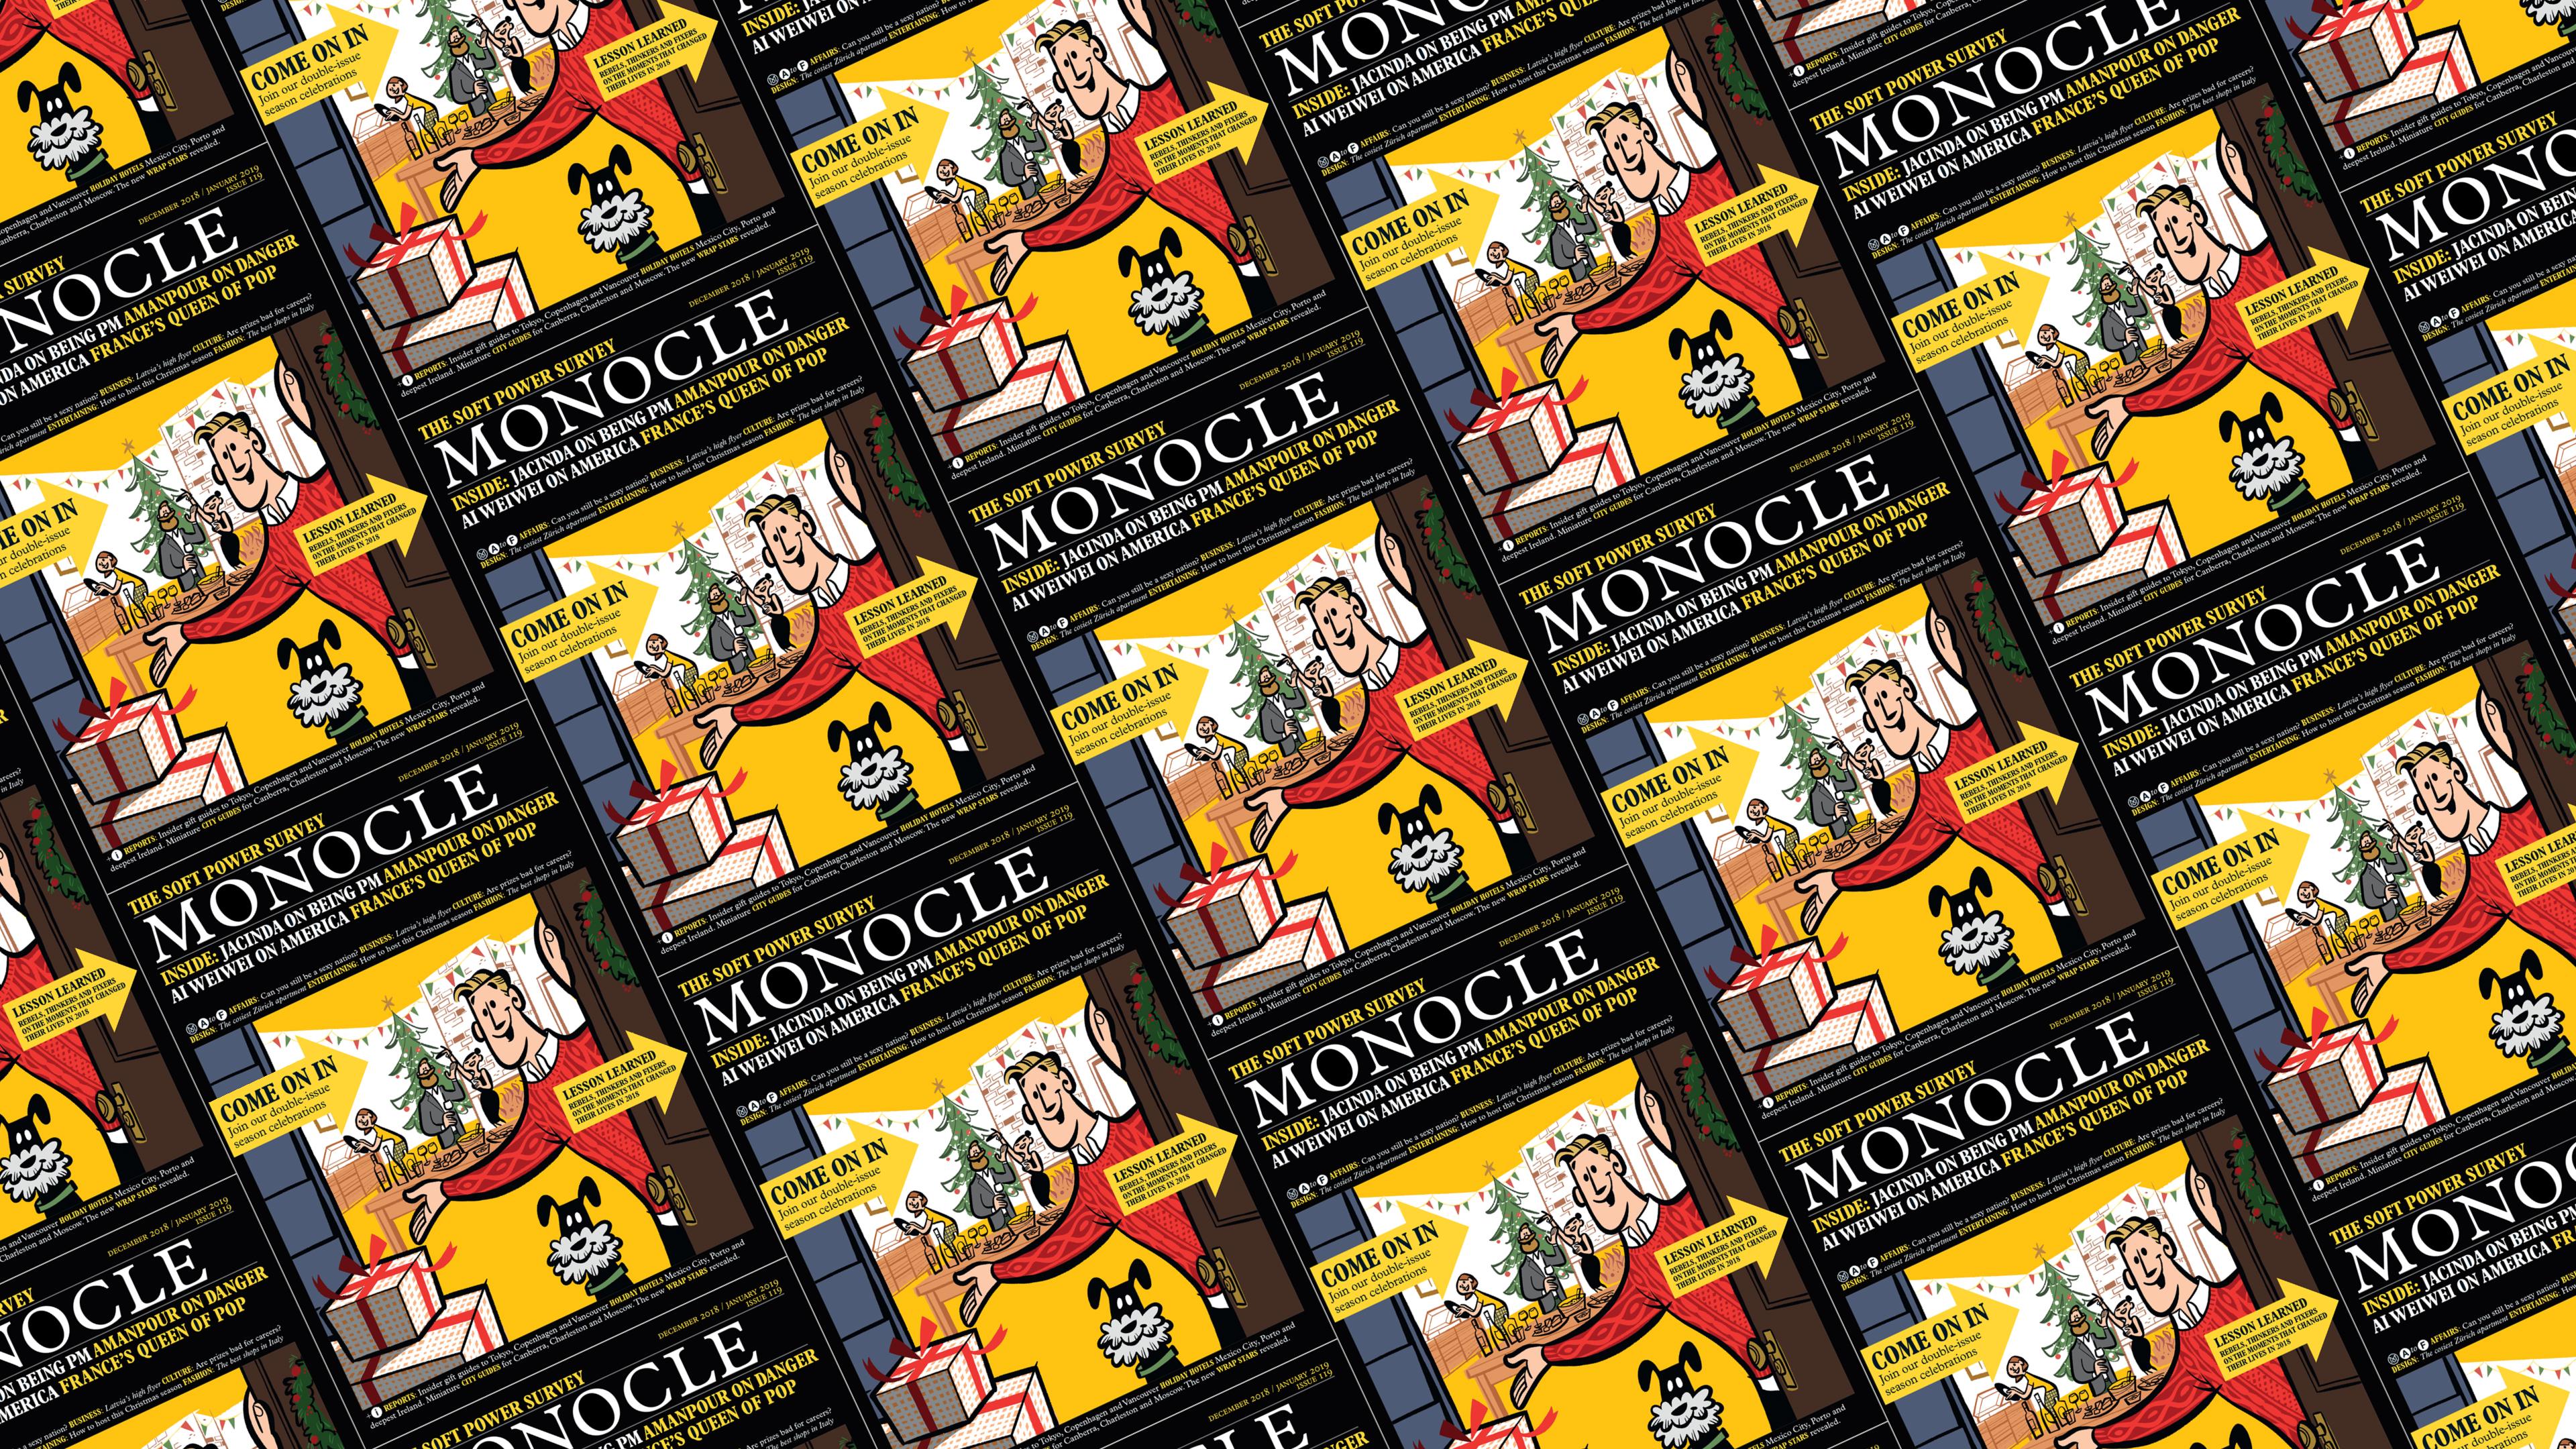 Monocle preview: December/January issue, 2018